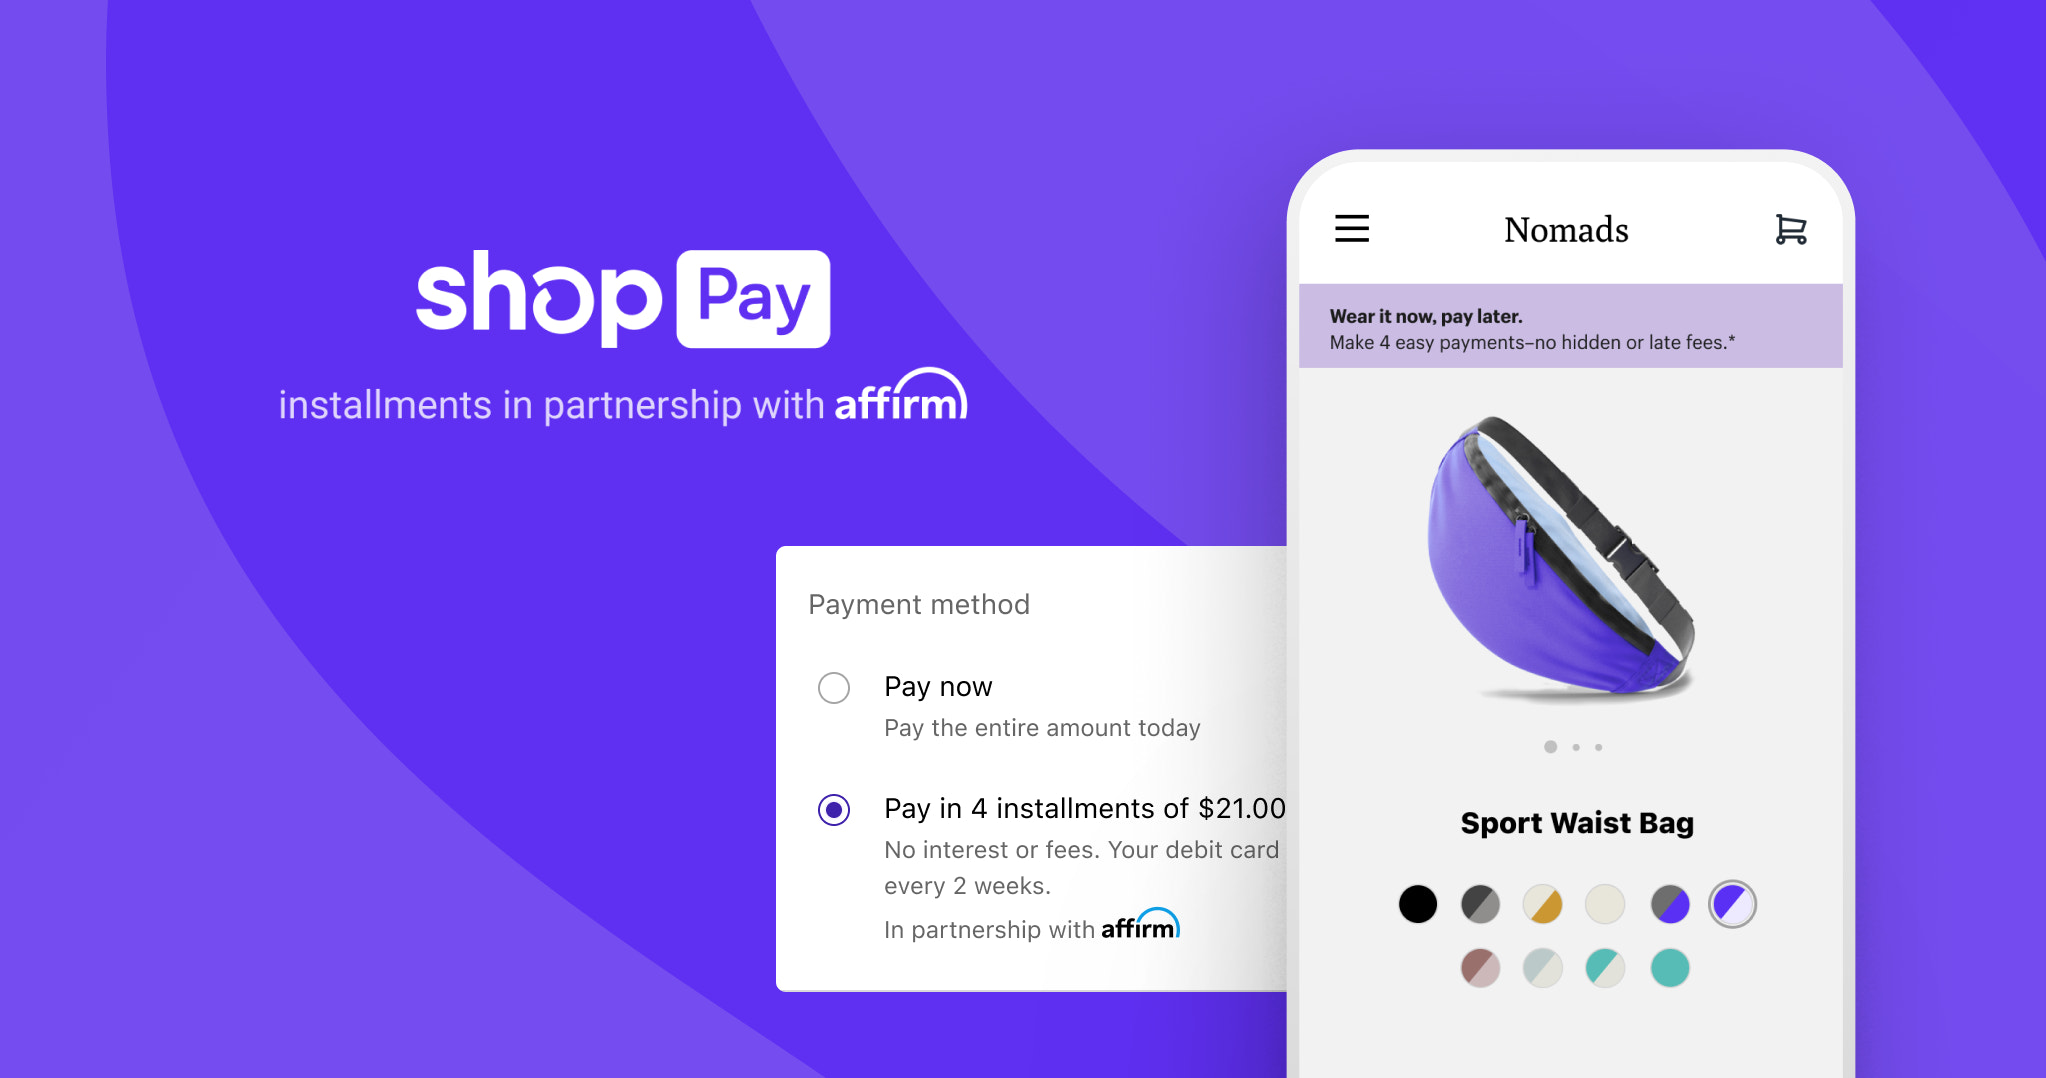 Buy Now Pay Later with Zip - Shop online or in-store today